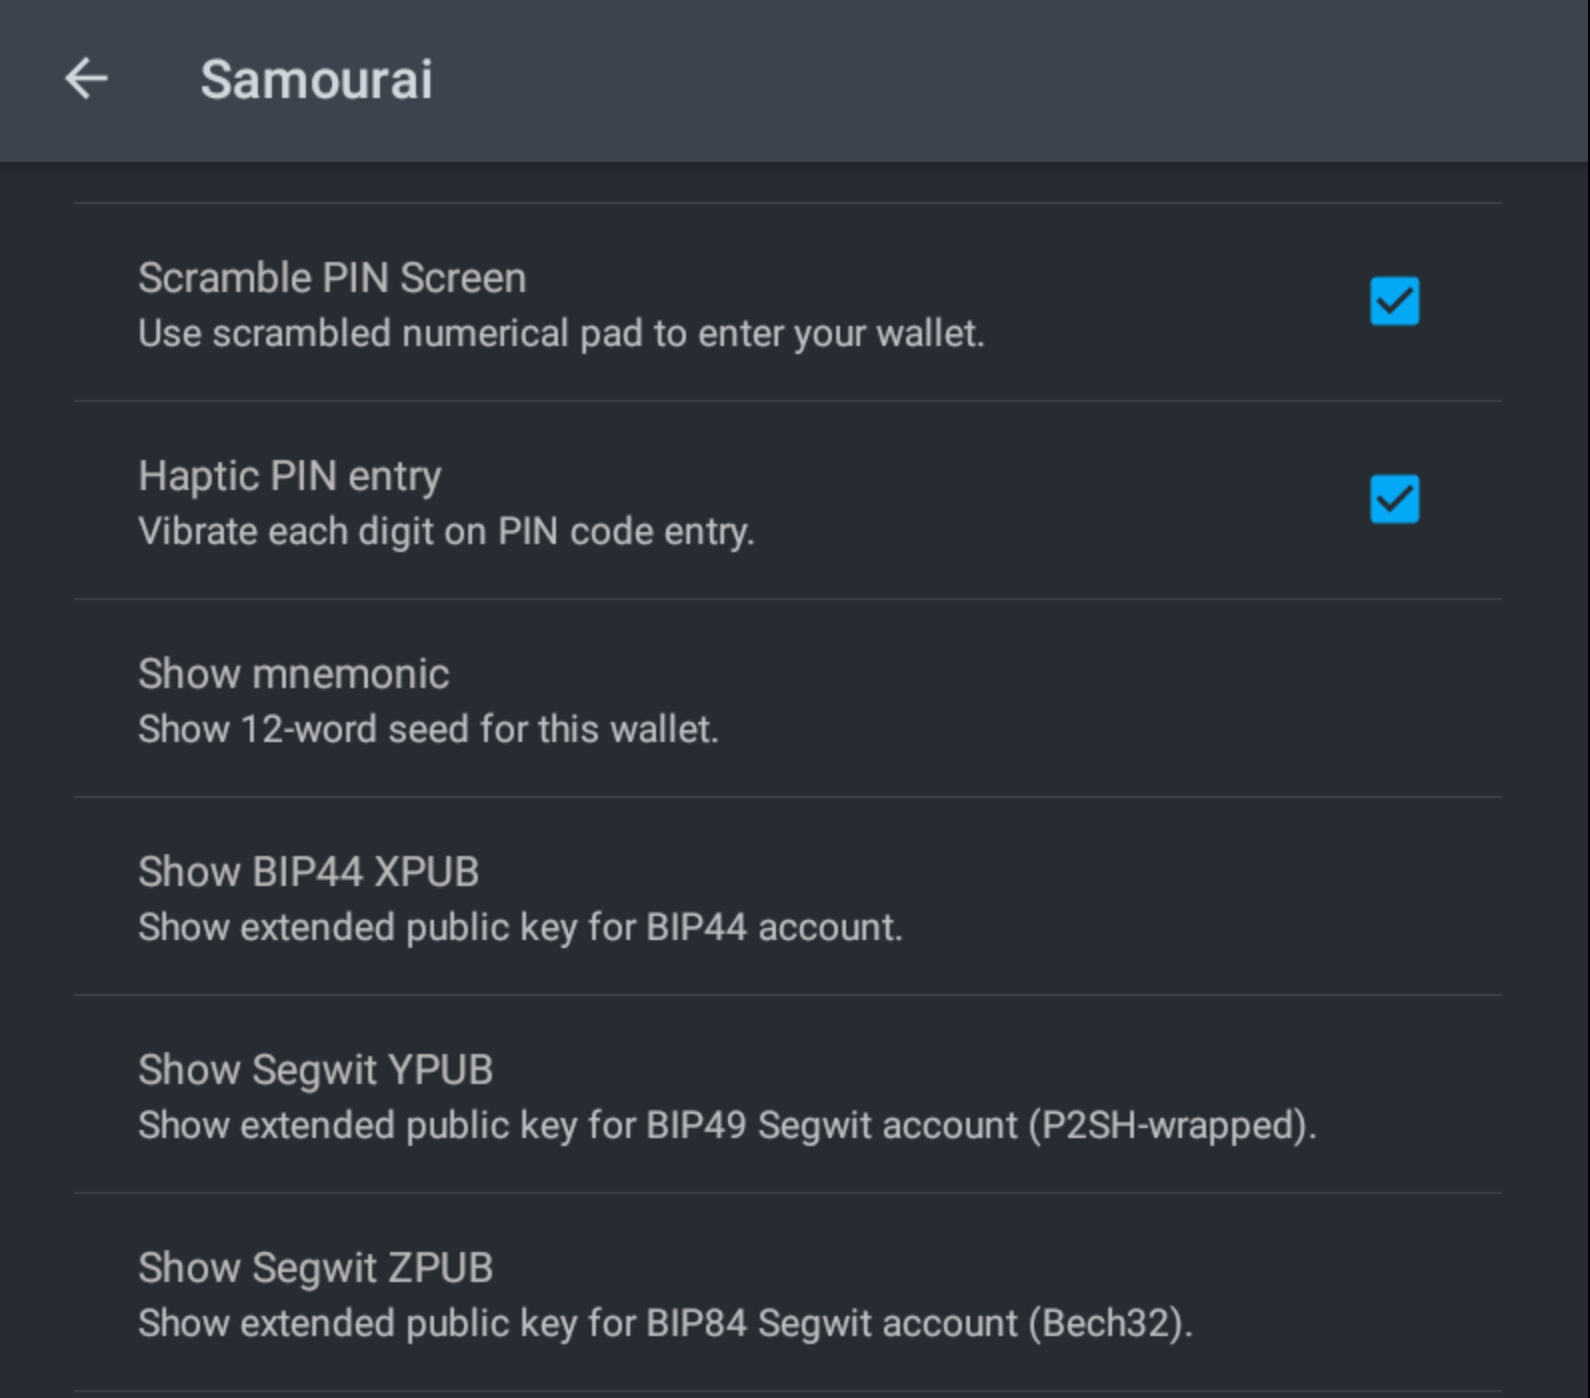 Samourai has options to view the wallet's X/Y/ZPUBs.